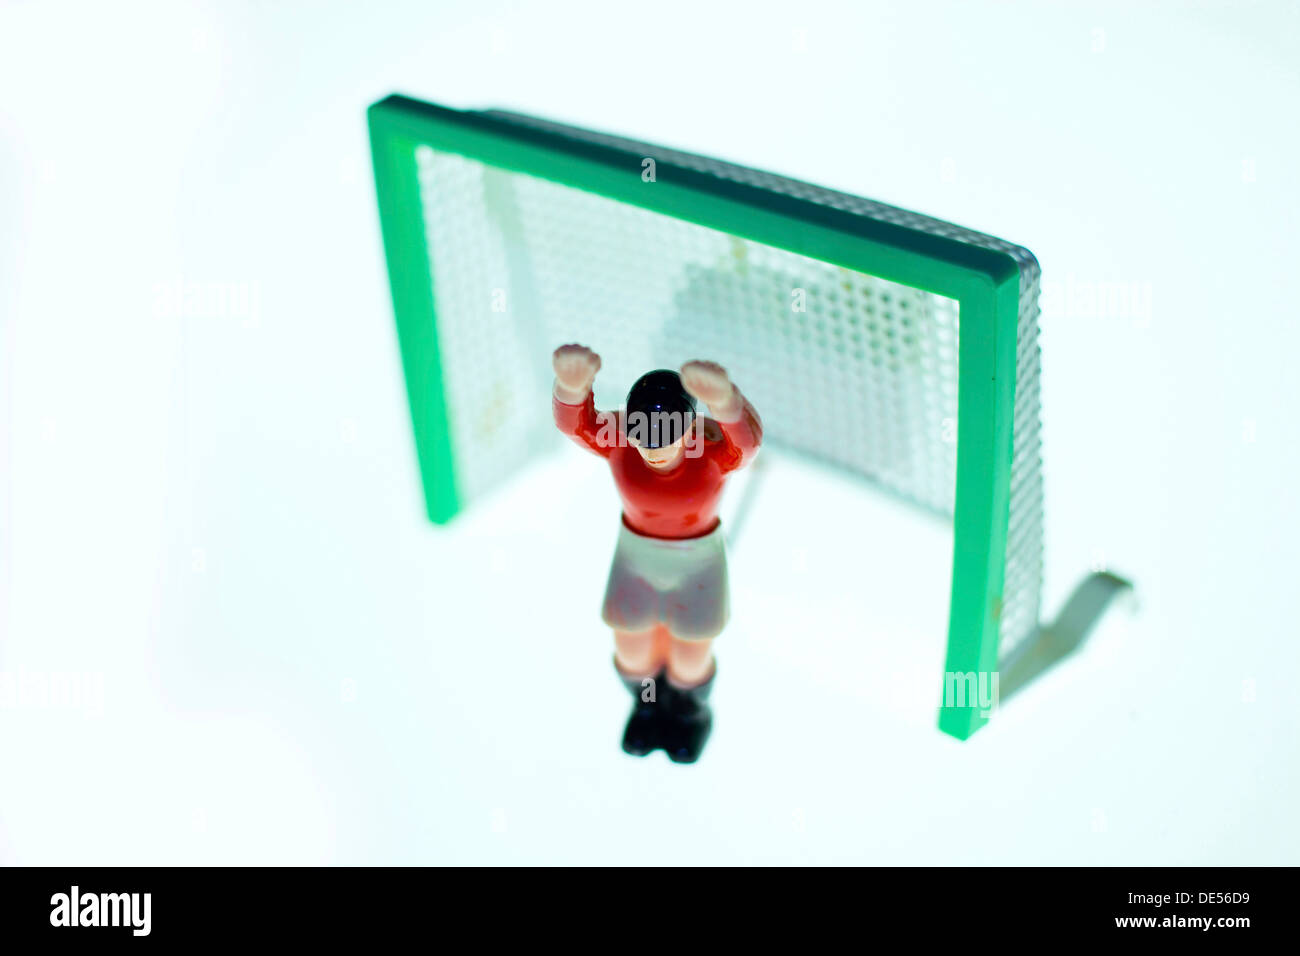 Goalkeeper figure of a Tip-Kick soccer game, Germany Stock Photo